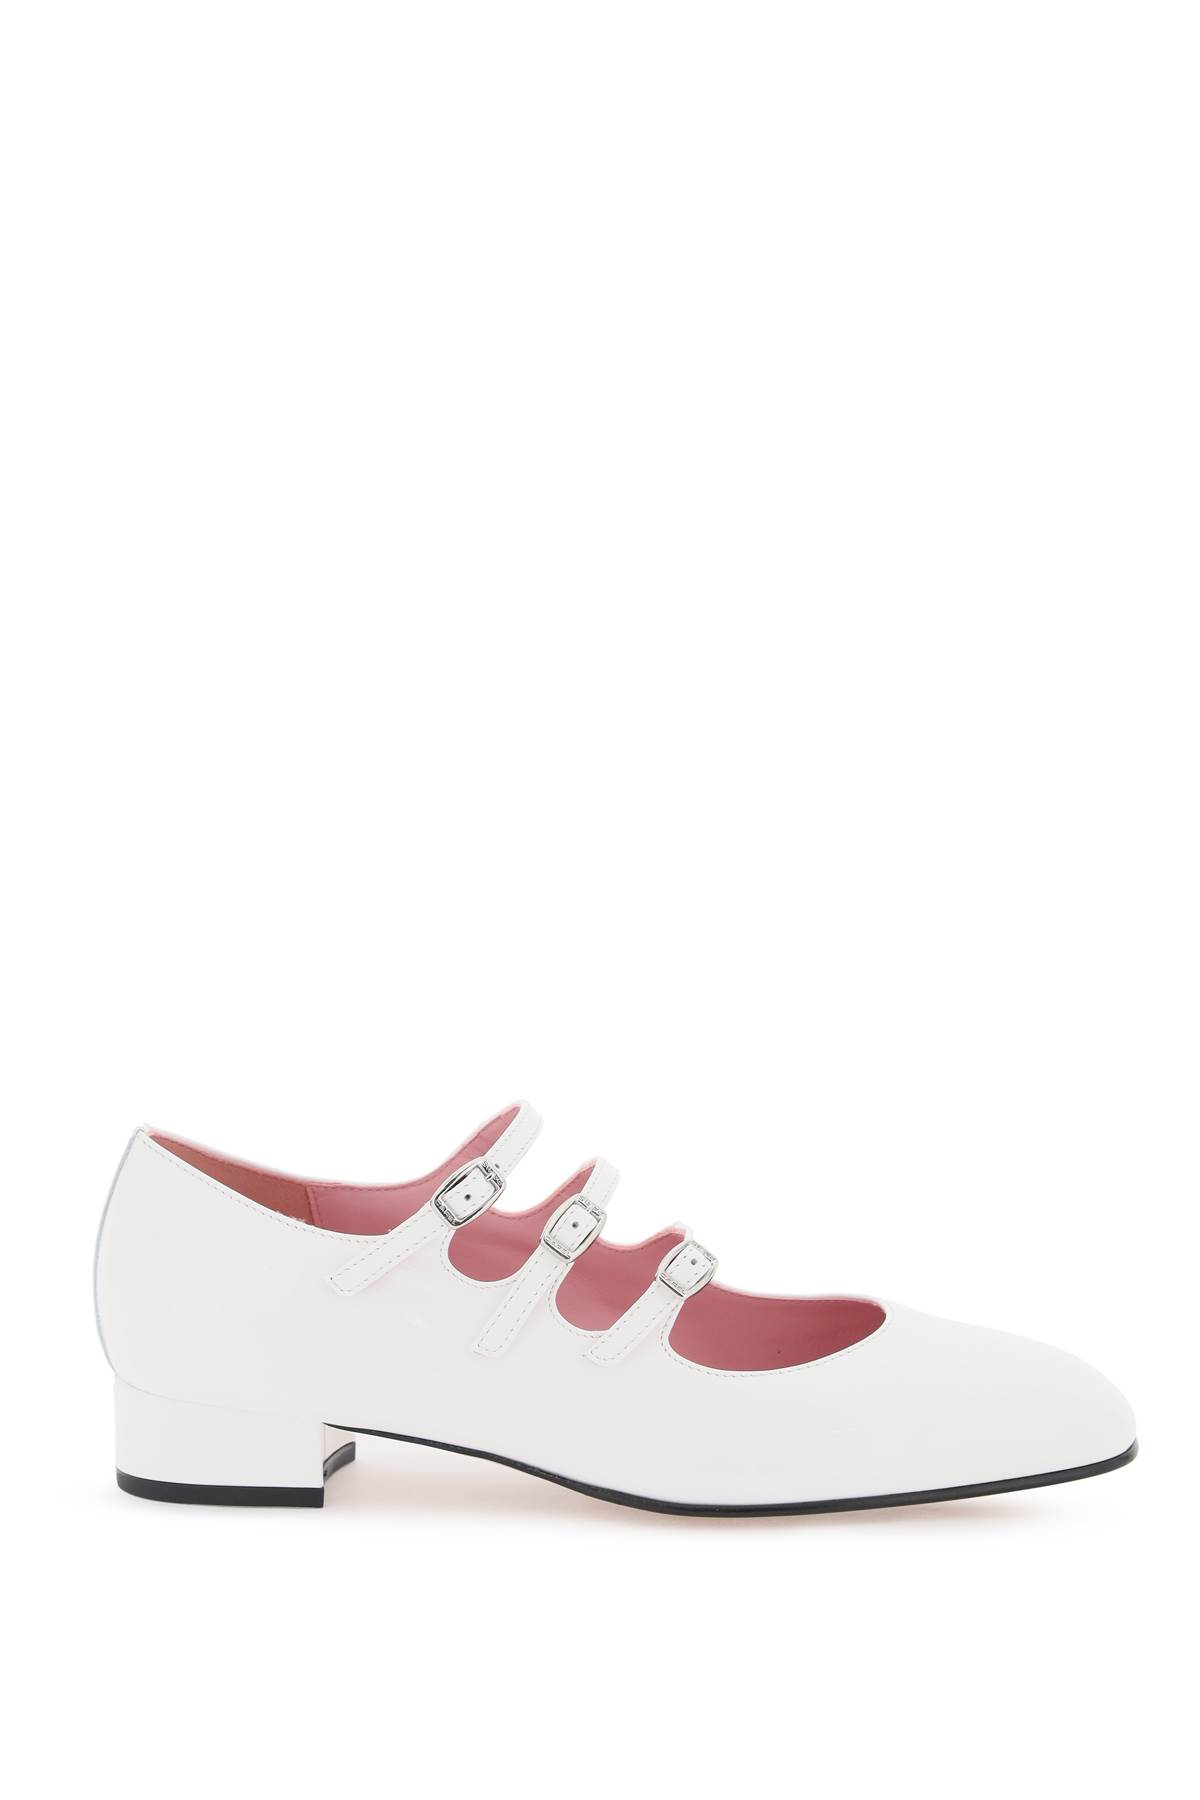 Shop Carel Patent Leather Ariana Mary Jane In Blanc (white)